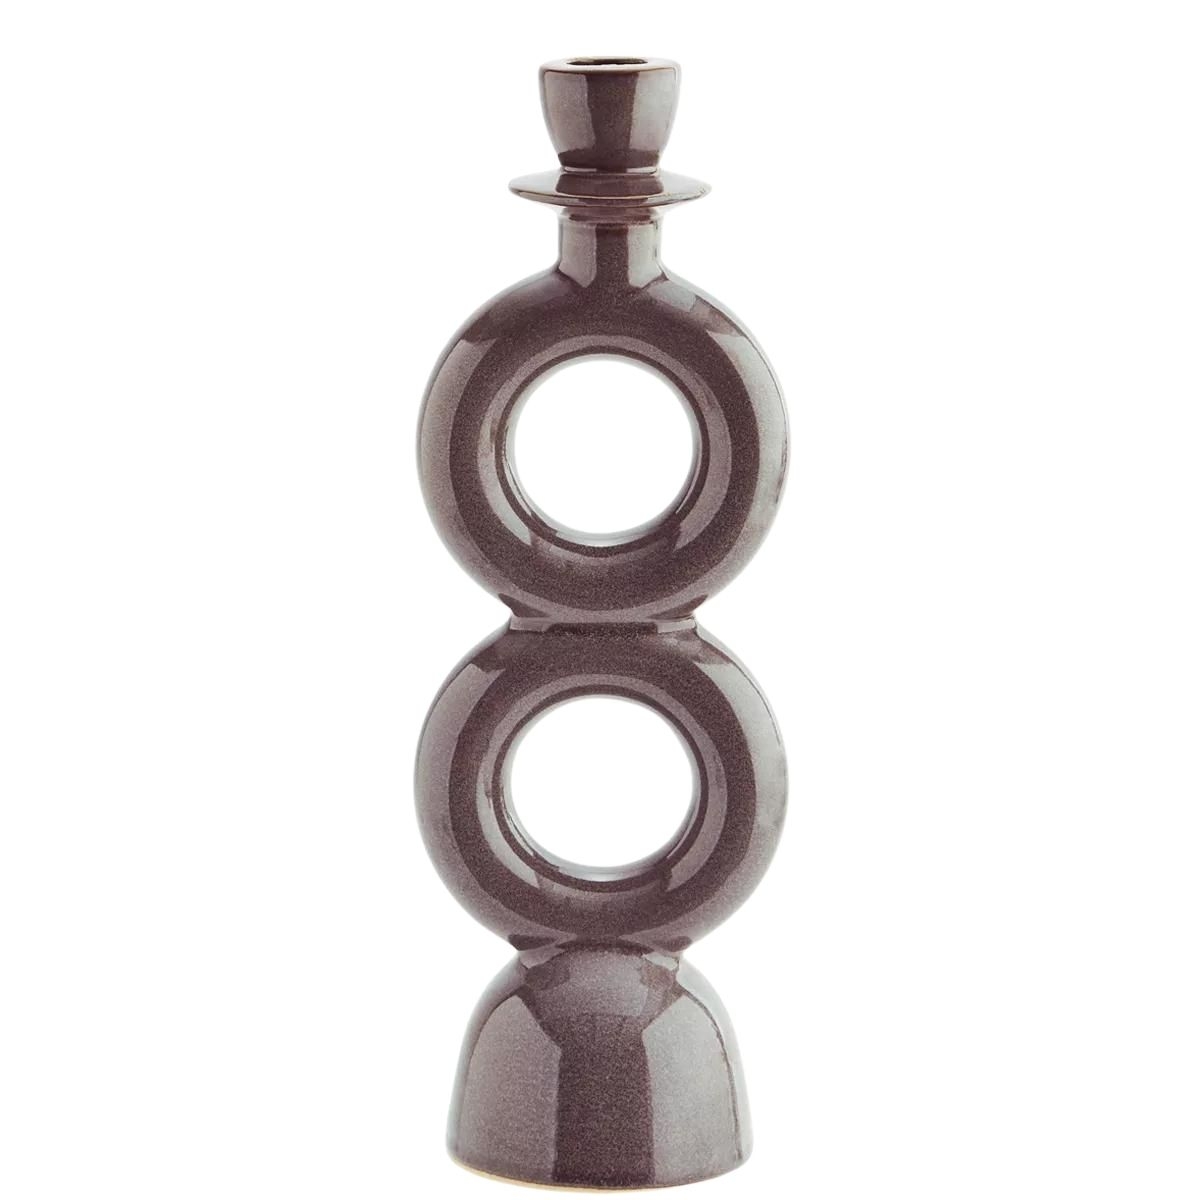 Madam Stoltz - Stoneware candle holder brown 30 cm - Candlesticks and candles - HY19307-30-DG 